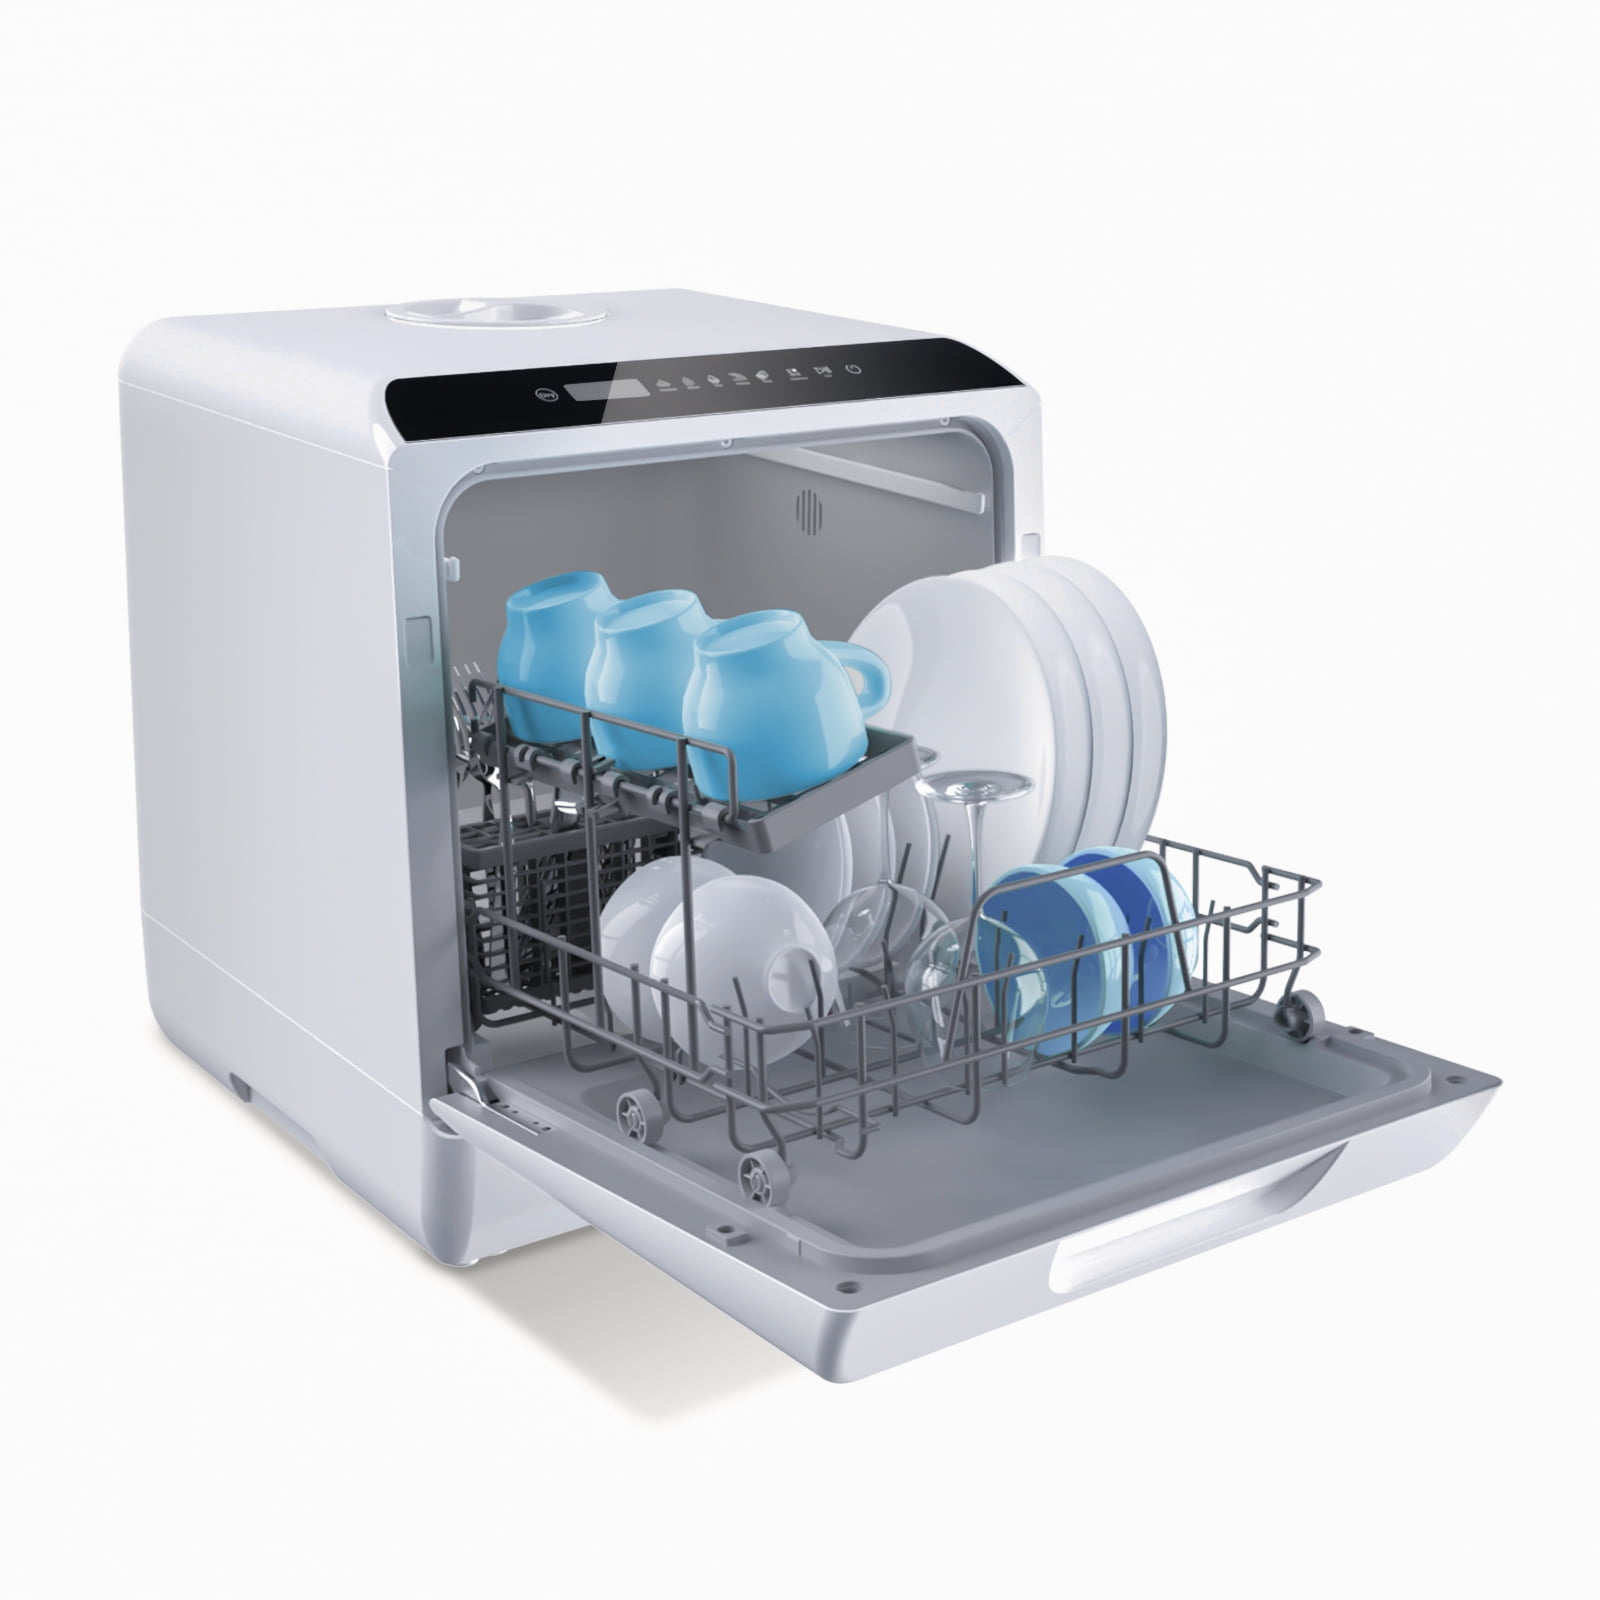  Hermitlux Countertop Dishwasher, 5 Washing Programs Portable  Dishwasher With 5-Liter Built-in Water Tank, No Hookup Needed : Appliances